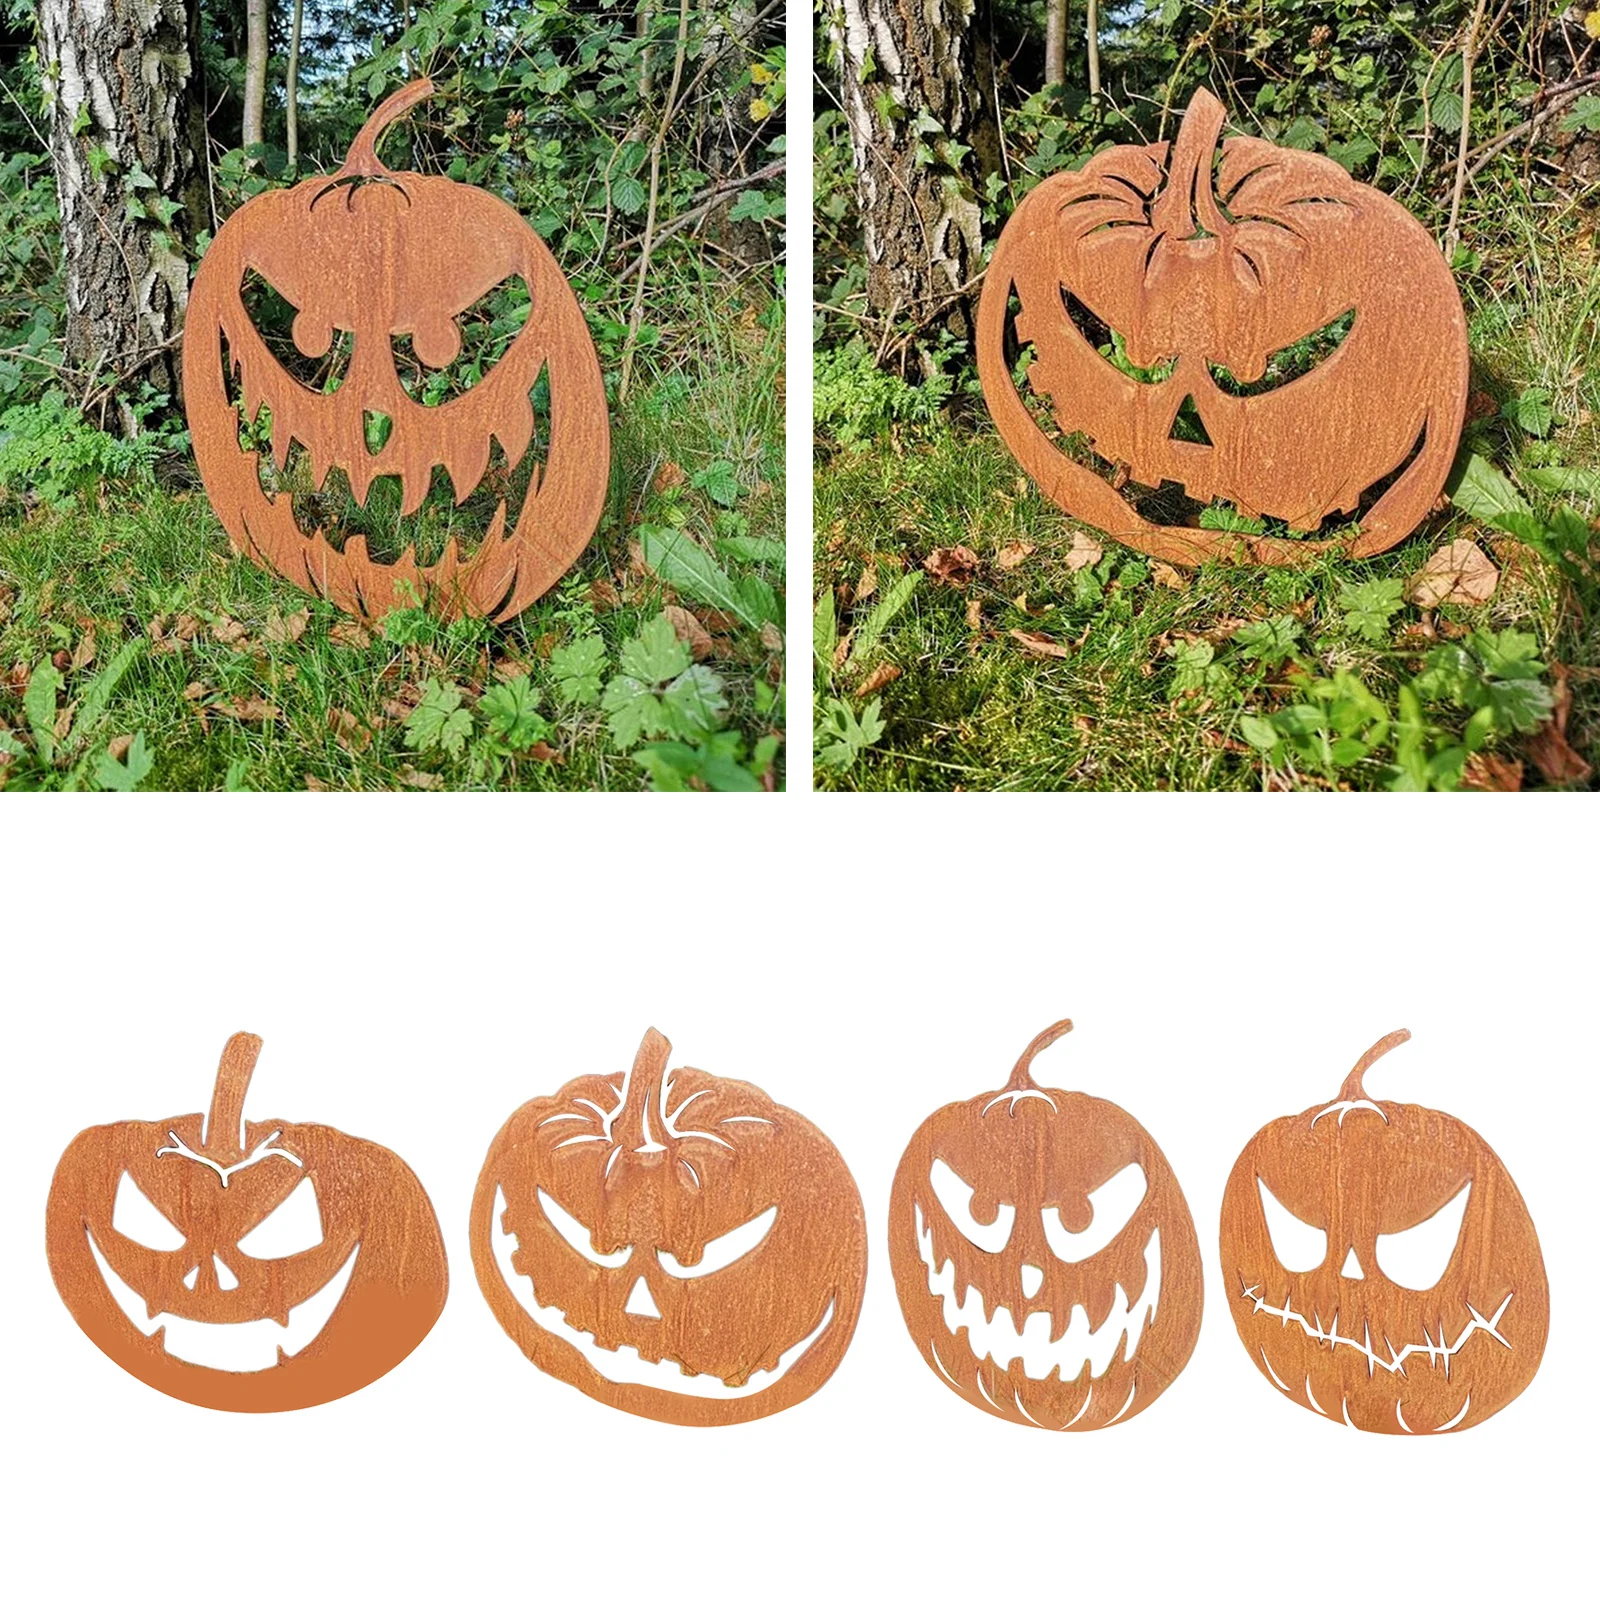 

Iron Art Pumpkin Garden Decor Yard Silhouette Outdoor Crafts Lawn Home Party Decorations Ornaments